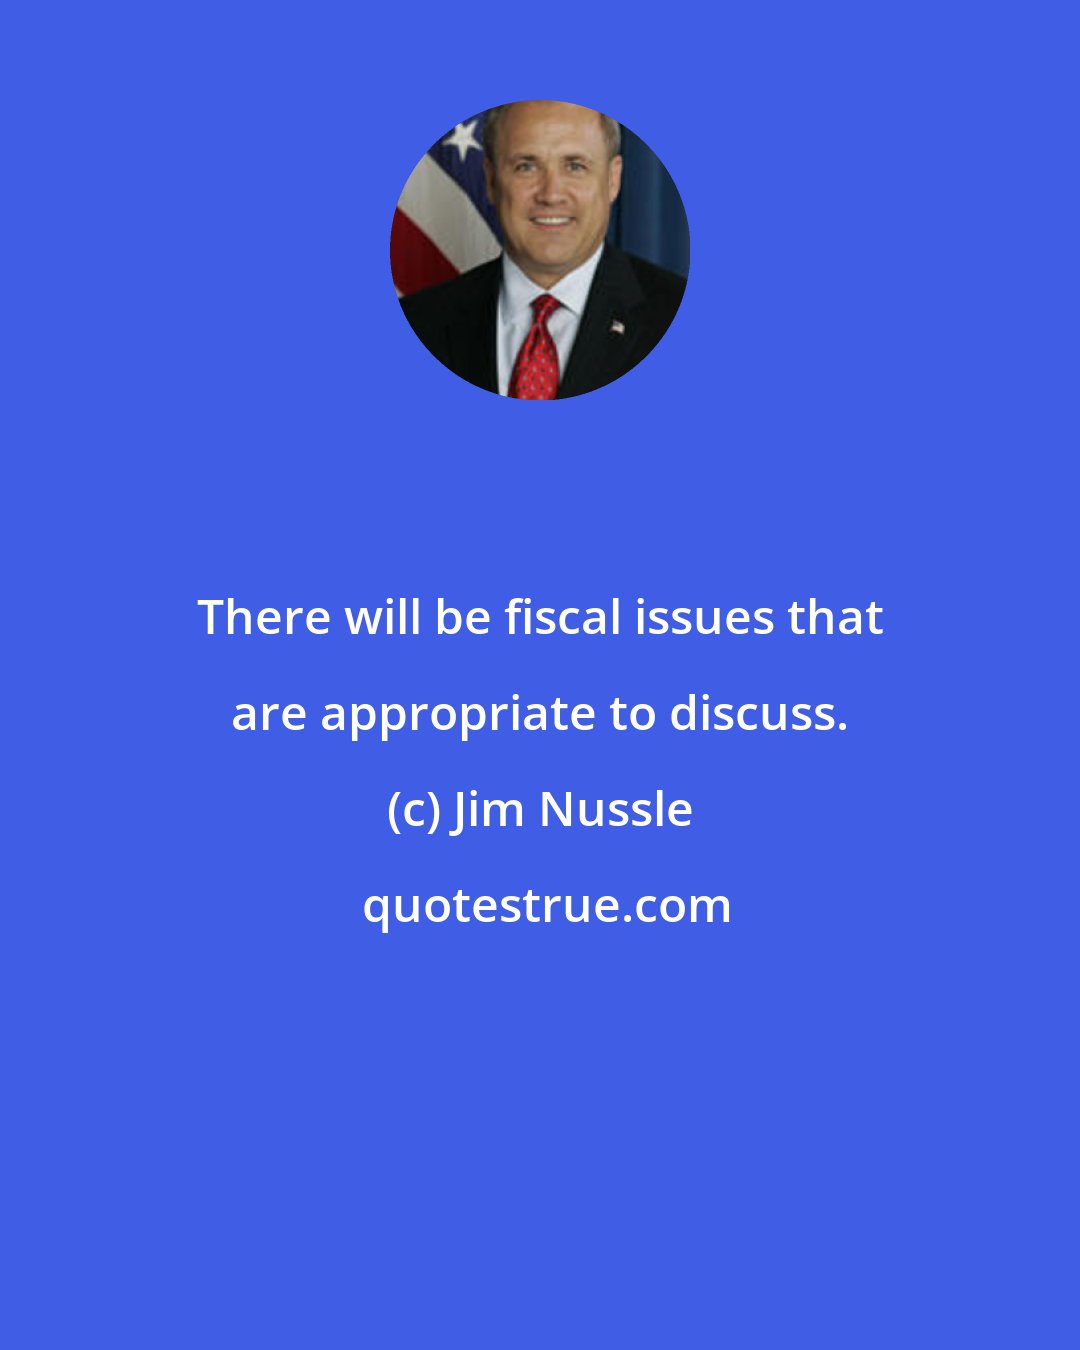 Jim Nussle: There will be fiscal issues that are appropriate to discuss.